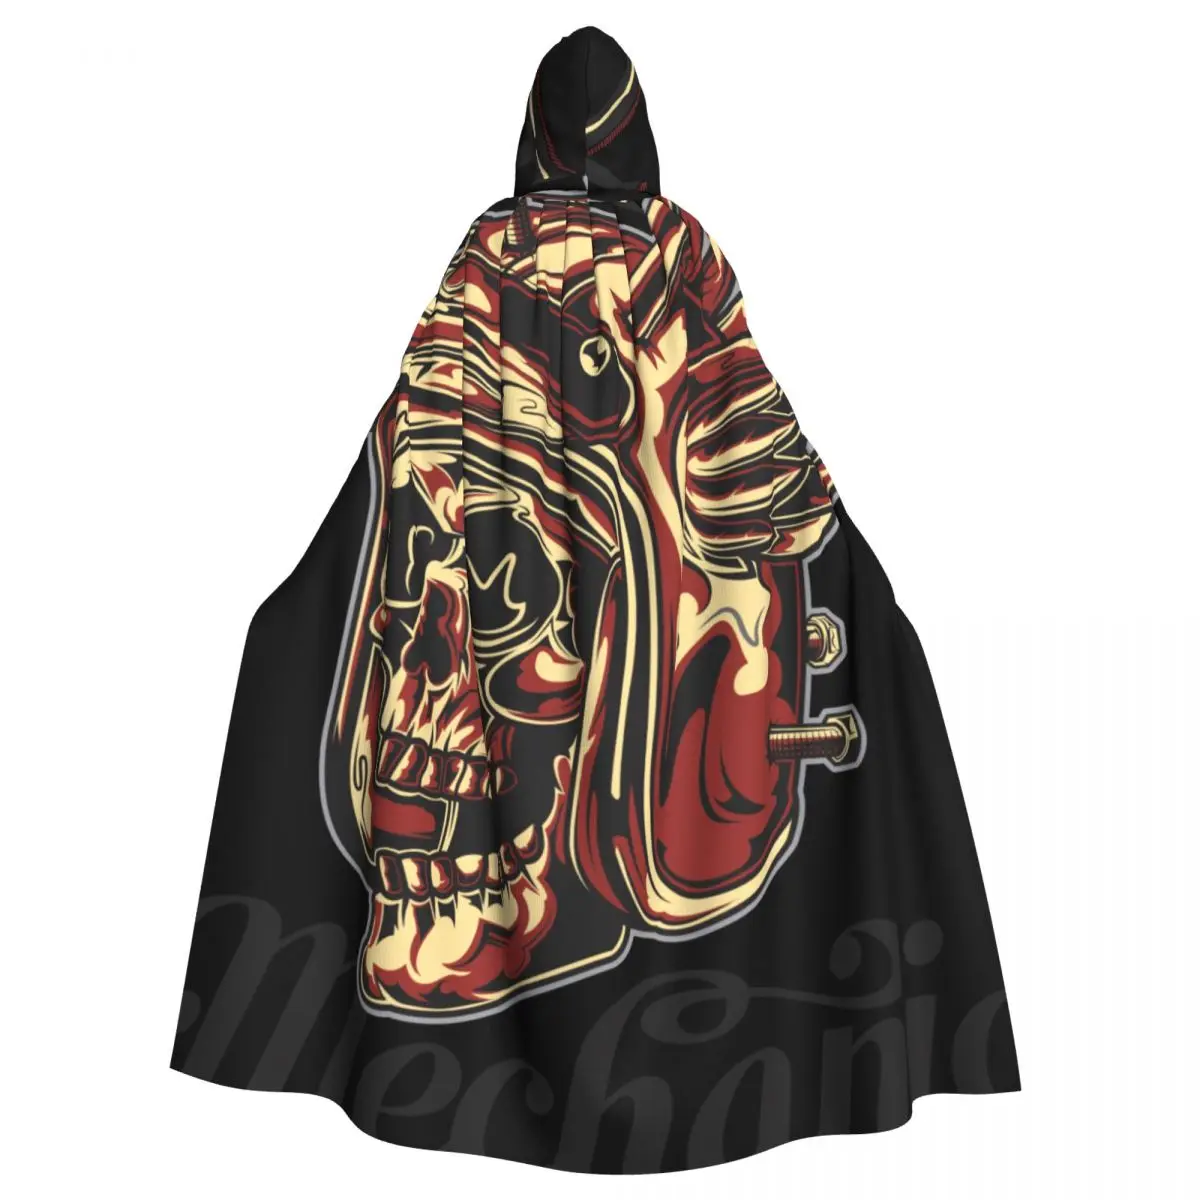 

Mechanic Skull With Winged Helmet Hooded Cloak Polyester Unisex Witch Cape Costume Accessory